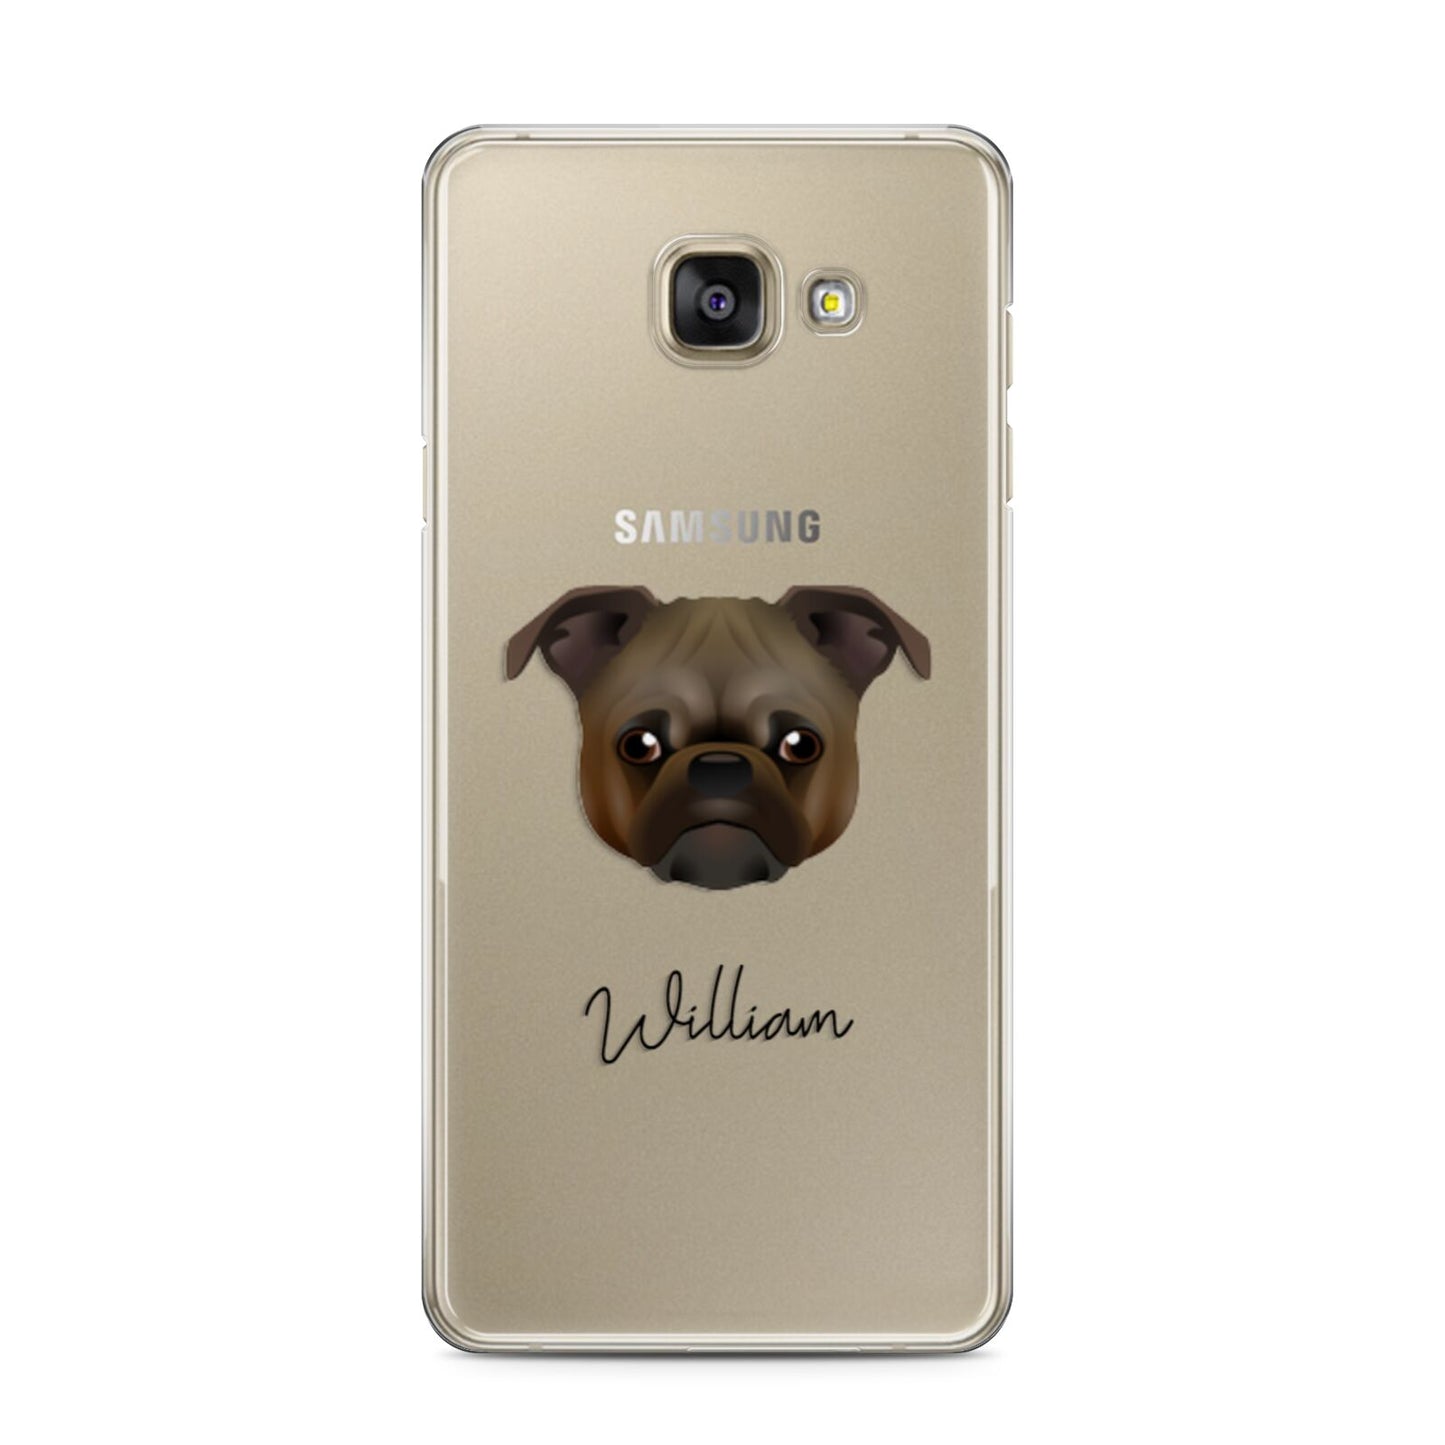 Chug Personalised Samsung Galaxy A3 2016 Case on gold phone